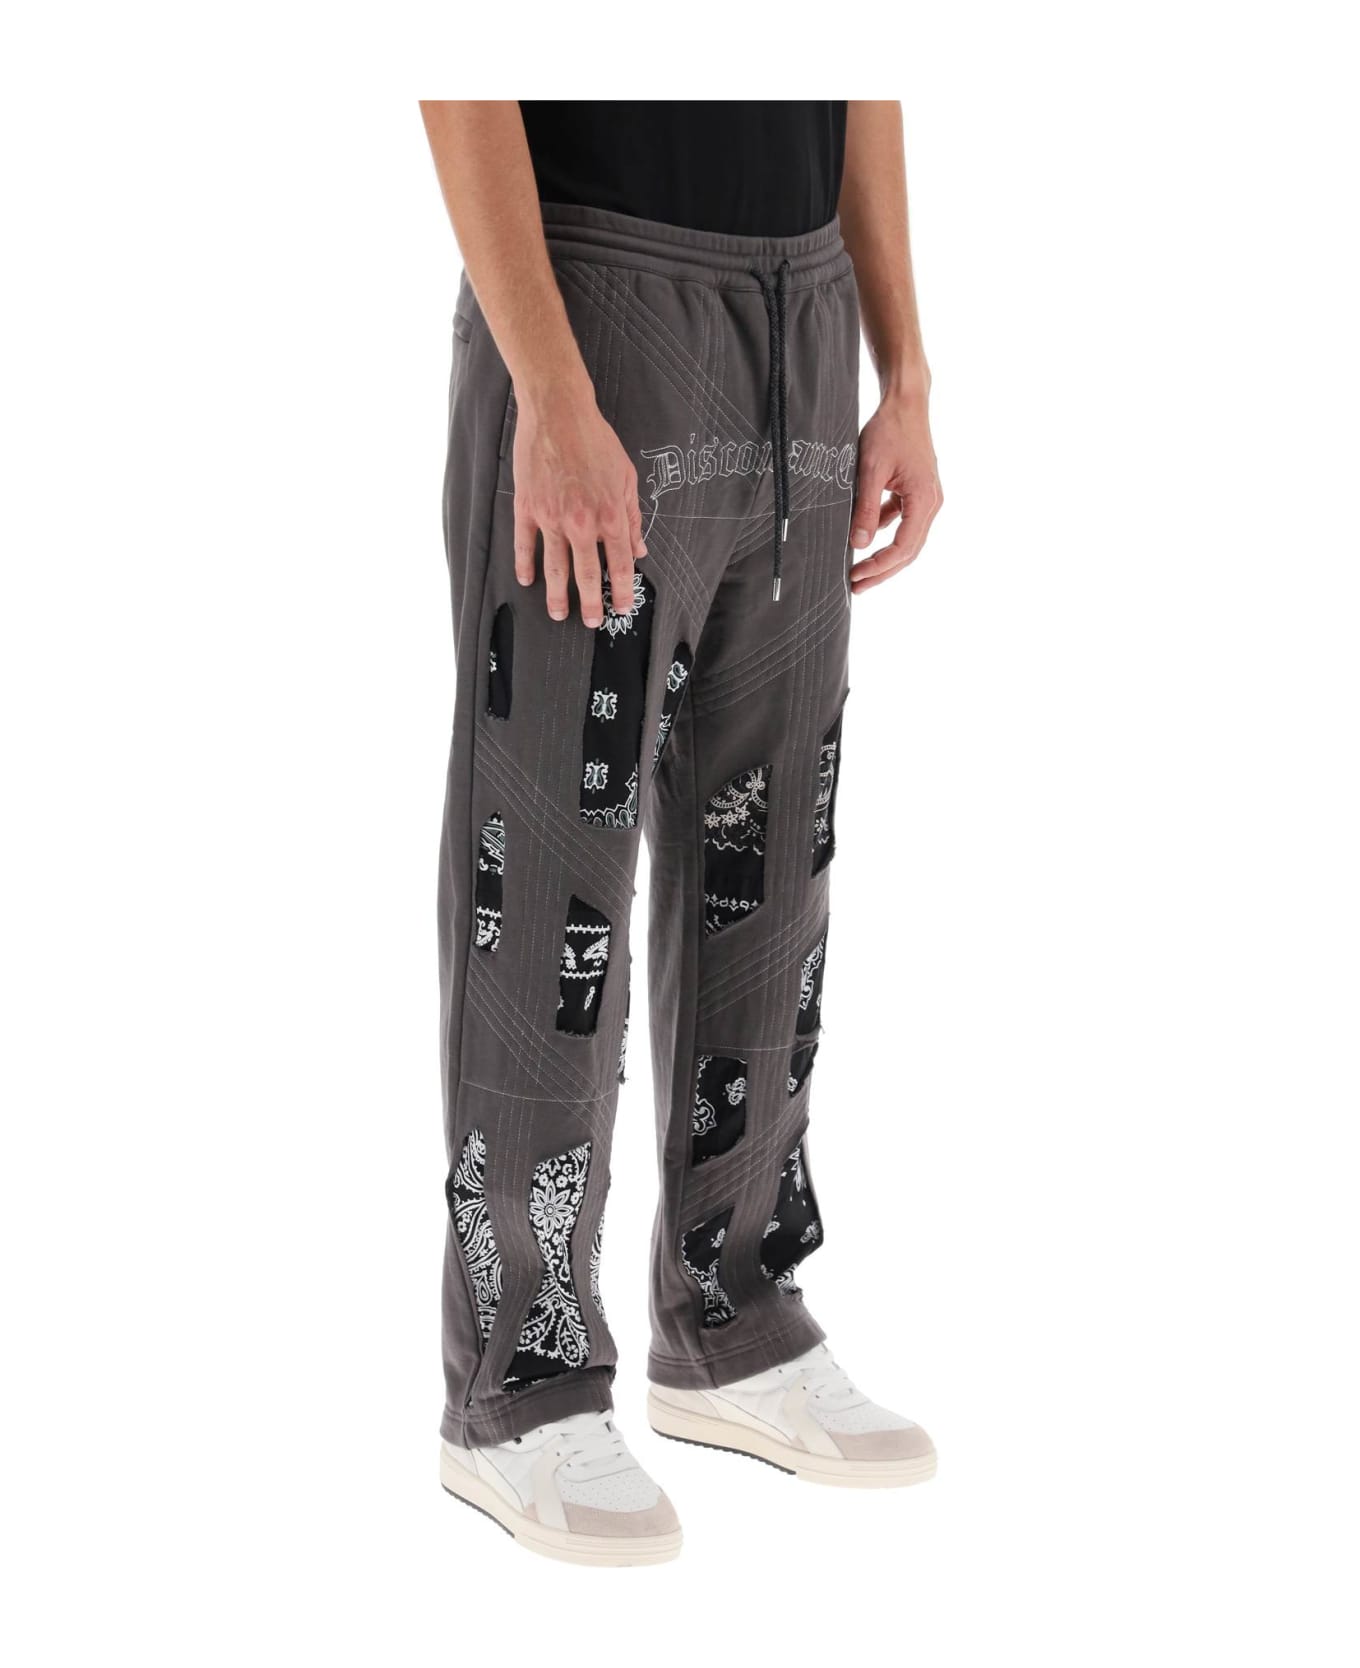 Children of the Discordance Joggers With Bandana Detailing - GRAY (Grey)